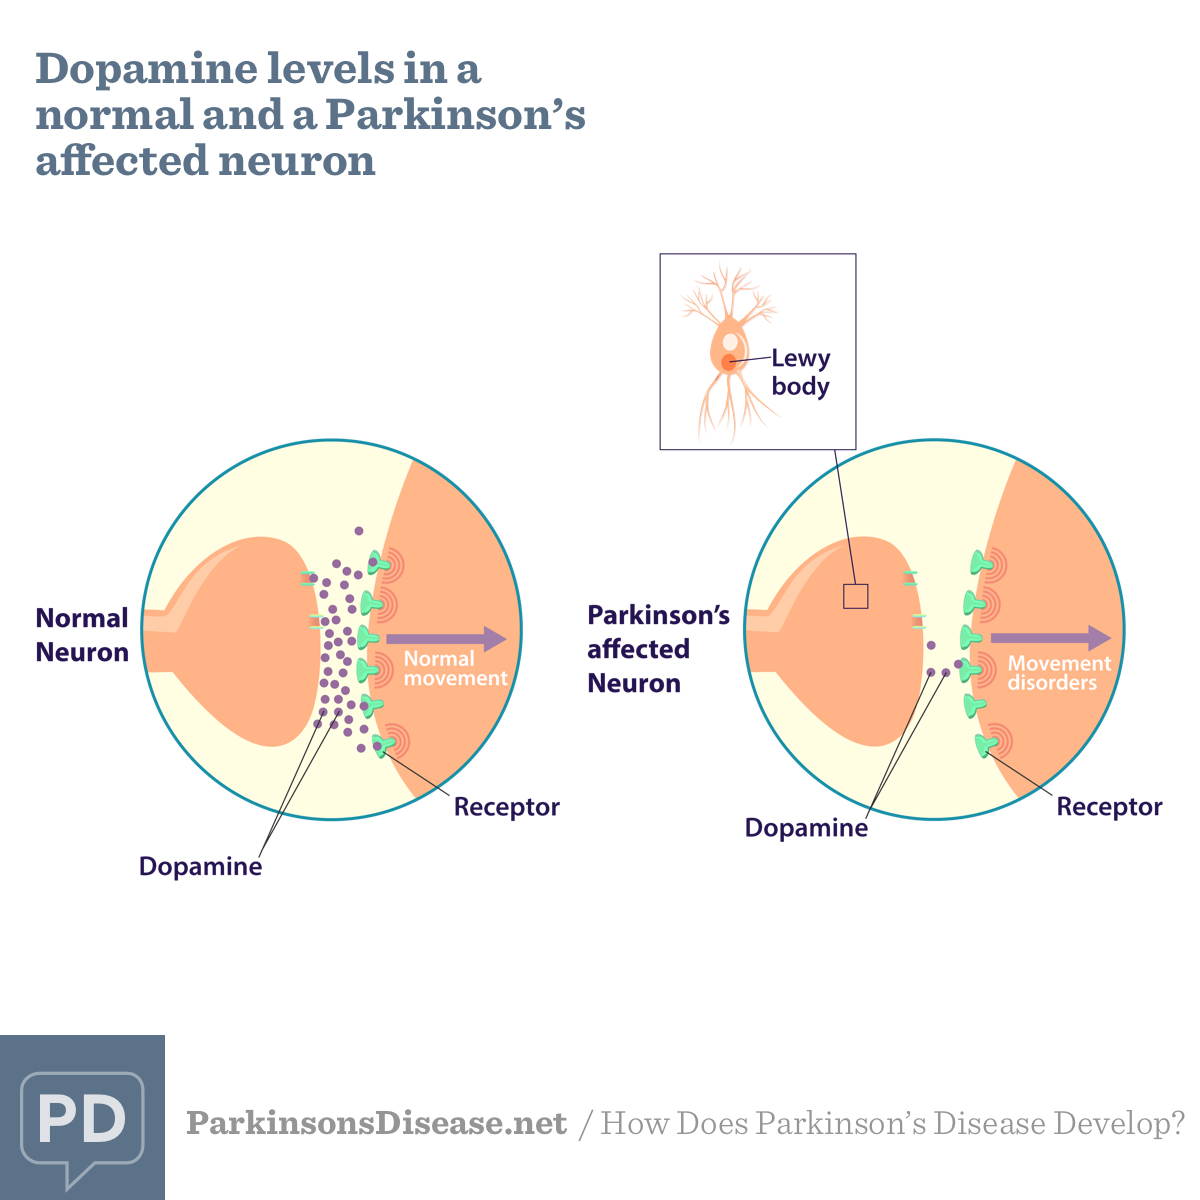 Dopamine levels in a normal neuron compared to a Parkinson's affected neuron